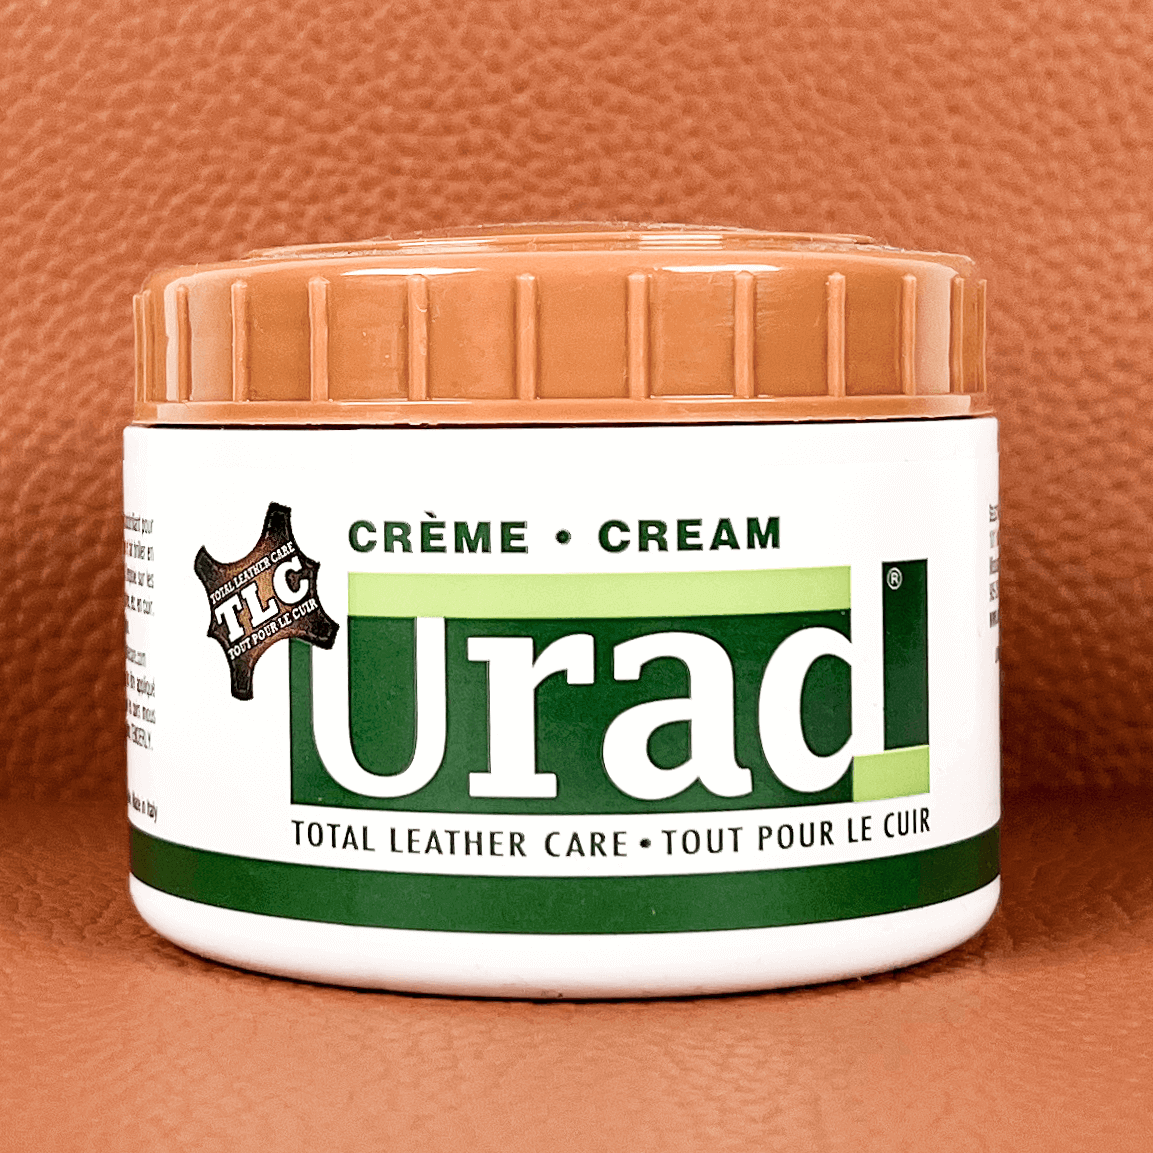 When it comes to the best leather cleaner for furniture, it's essential to pair it with a natural leather conditioner like Urad. This top-quality product is made from natural ingredients that deeply penetrate the leather, nourishing and protecting it from damage. By using Urad natural leather conditioner alongside a high-quality leather cleaner, you can ensure that your furniture stays in excellent condition and looks beautiful for years to come.